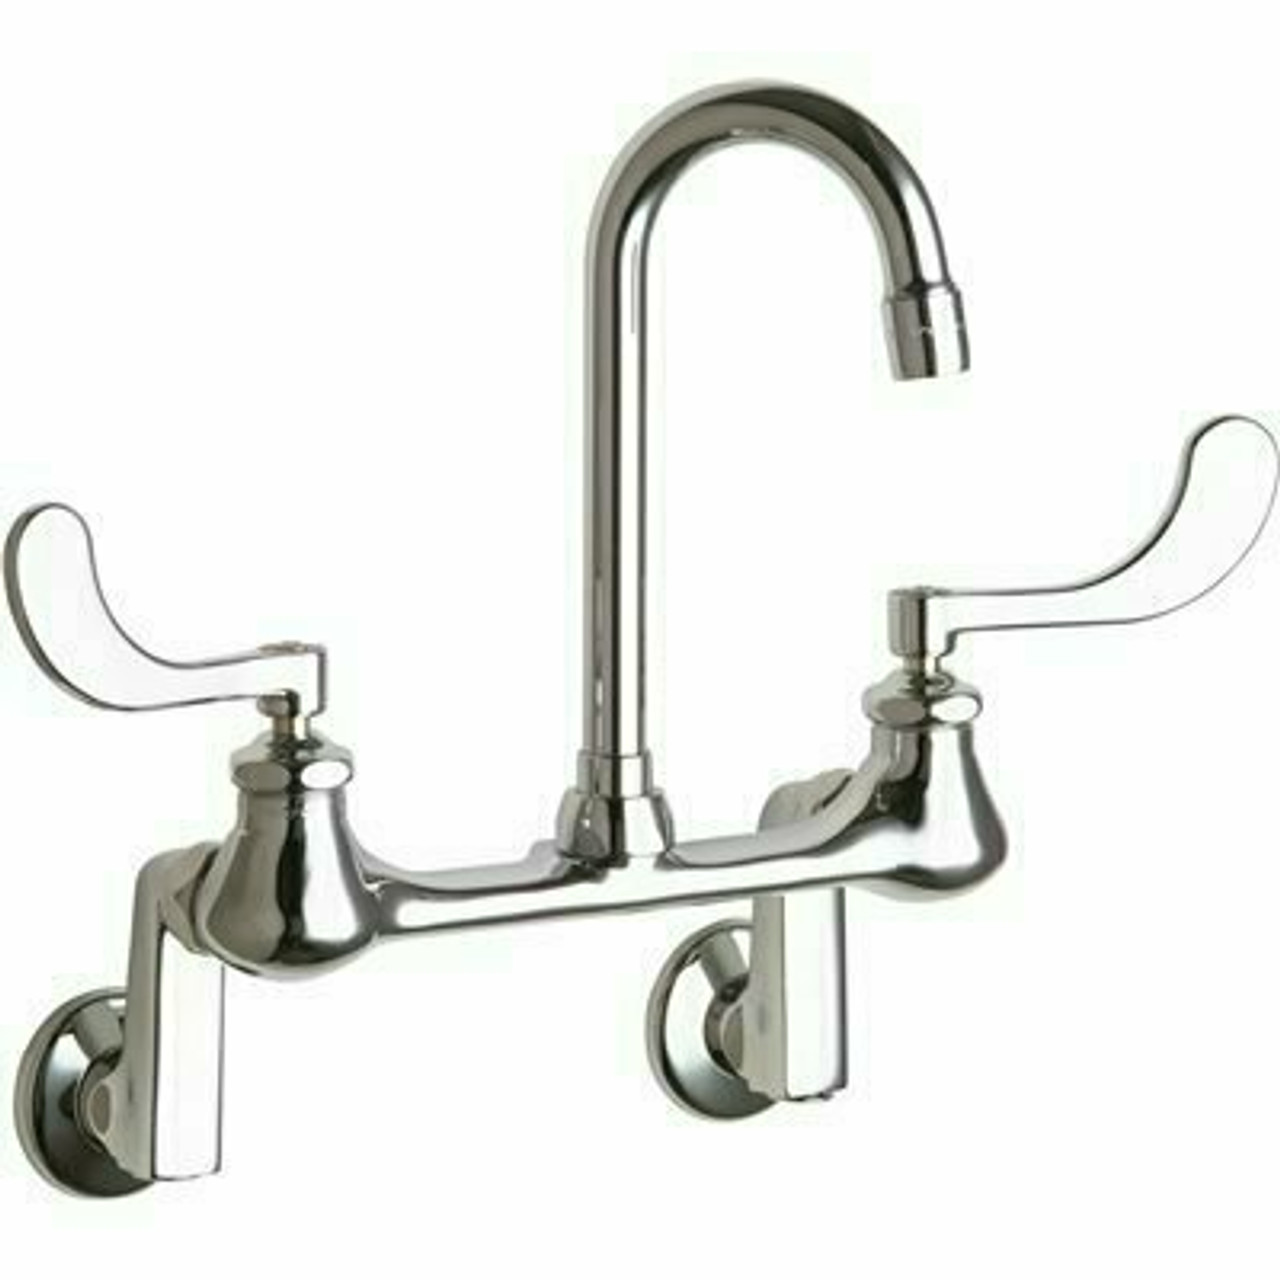 Chicago Faucets Wall-Mounted Hospital Sink Faucet, 3.5-Inch Gooseneck Spout, Wristblade Handles, 2.2 Gpm Aerator